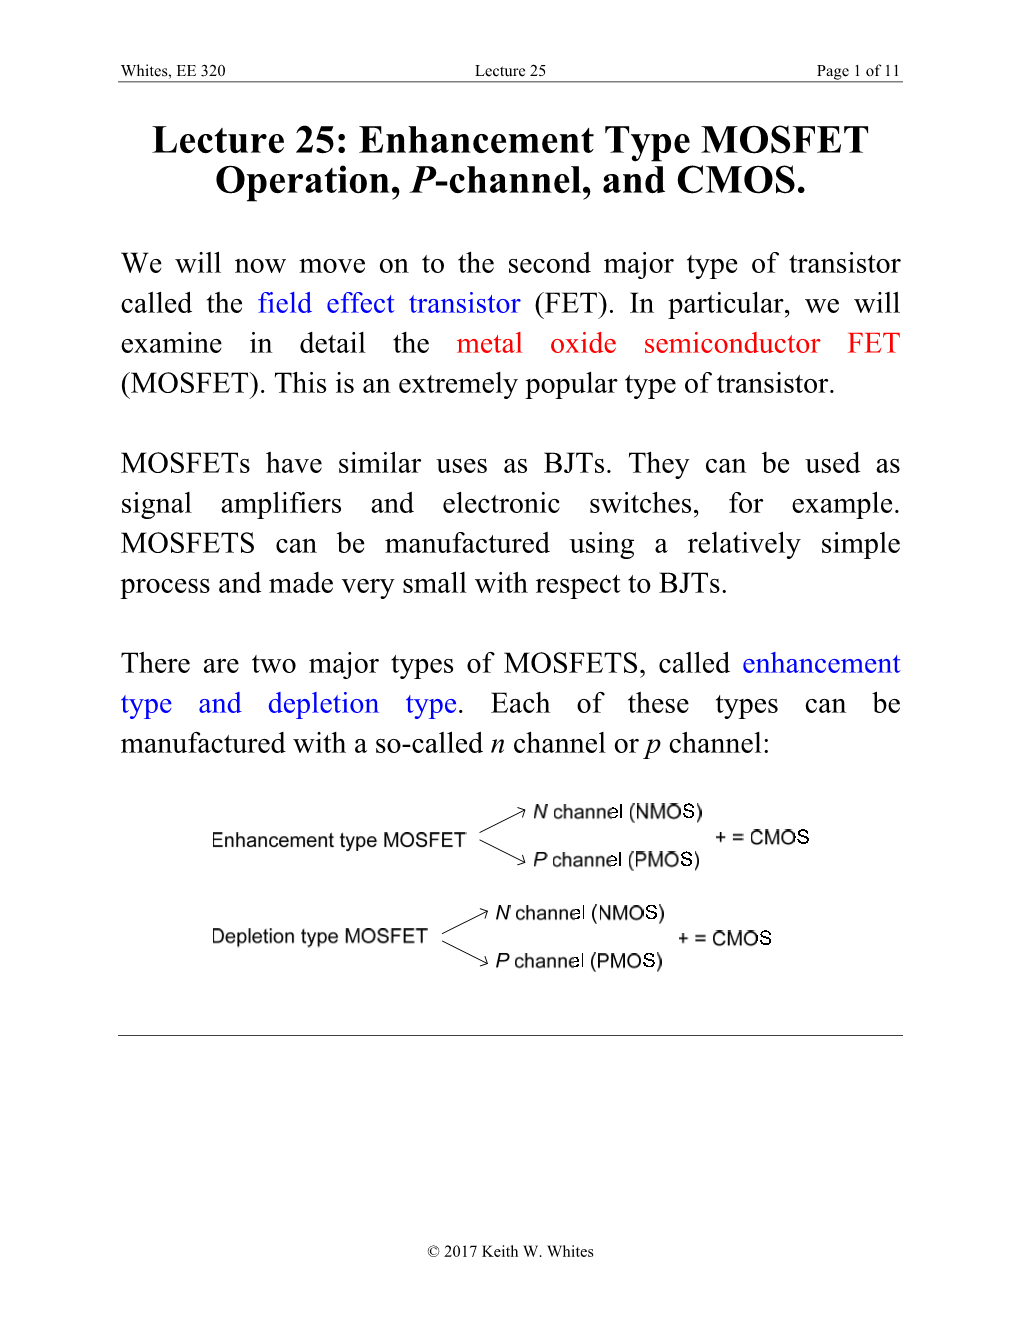 Lecture 25: Enhancement Type MOSFET Operation, P-Channel, and CMOS